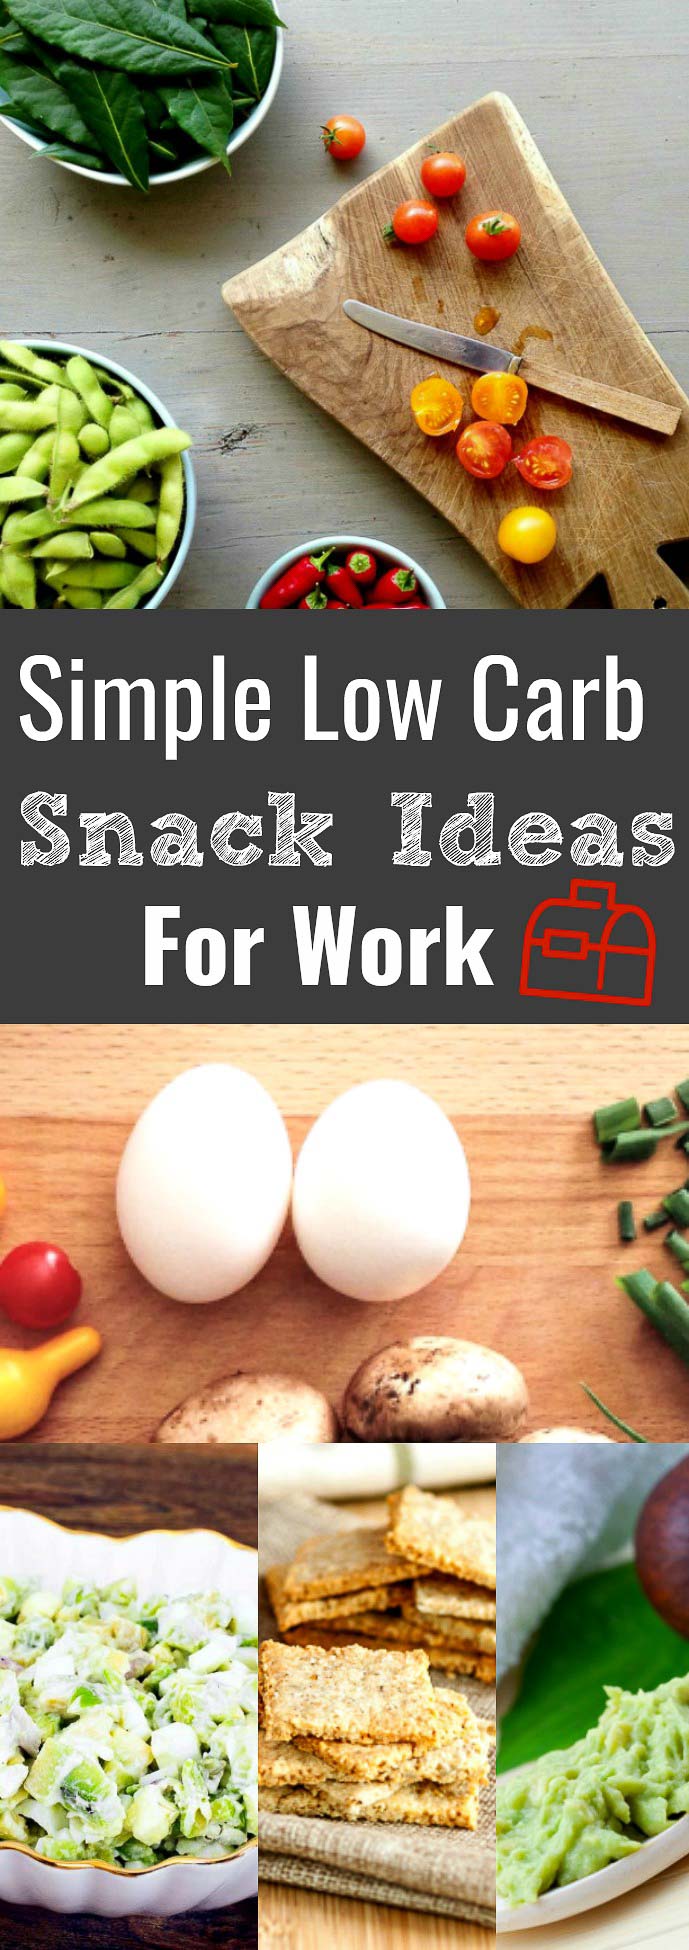 Simple Low Carb Snack Ideas For Work